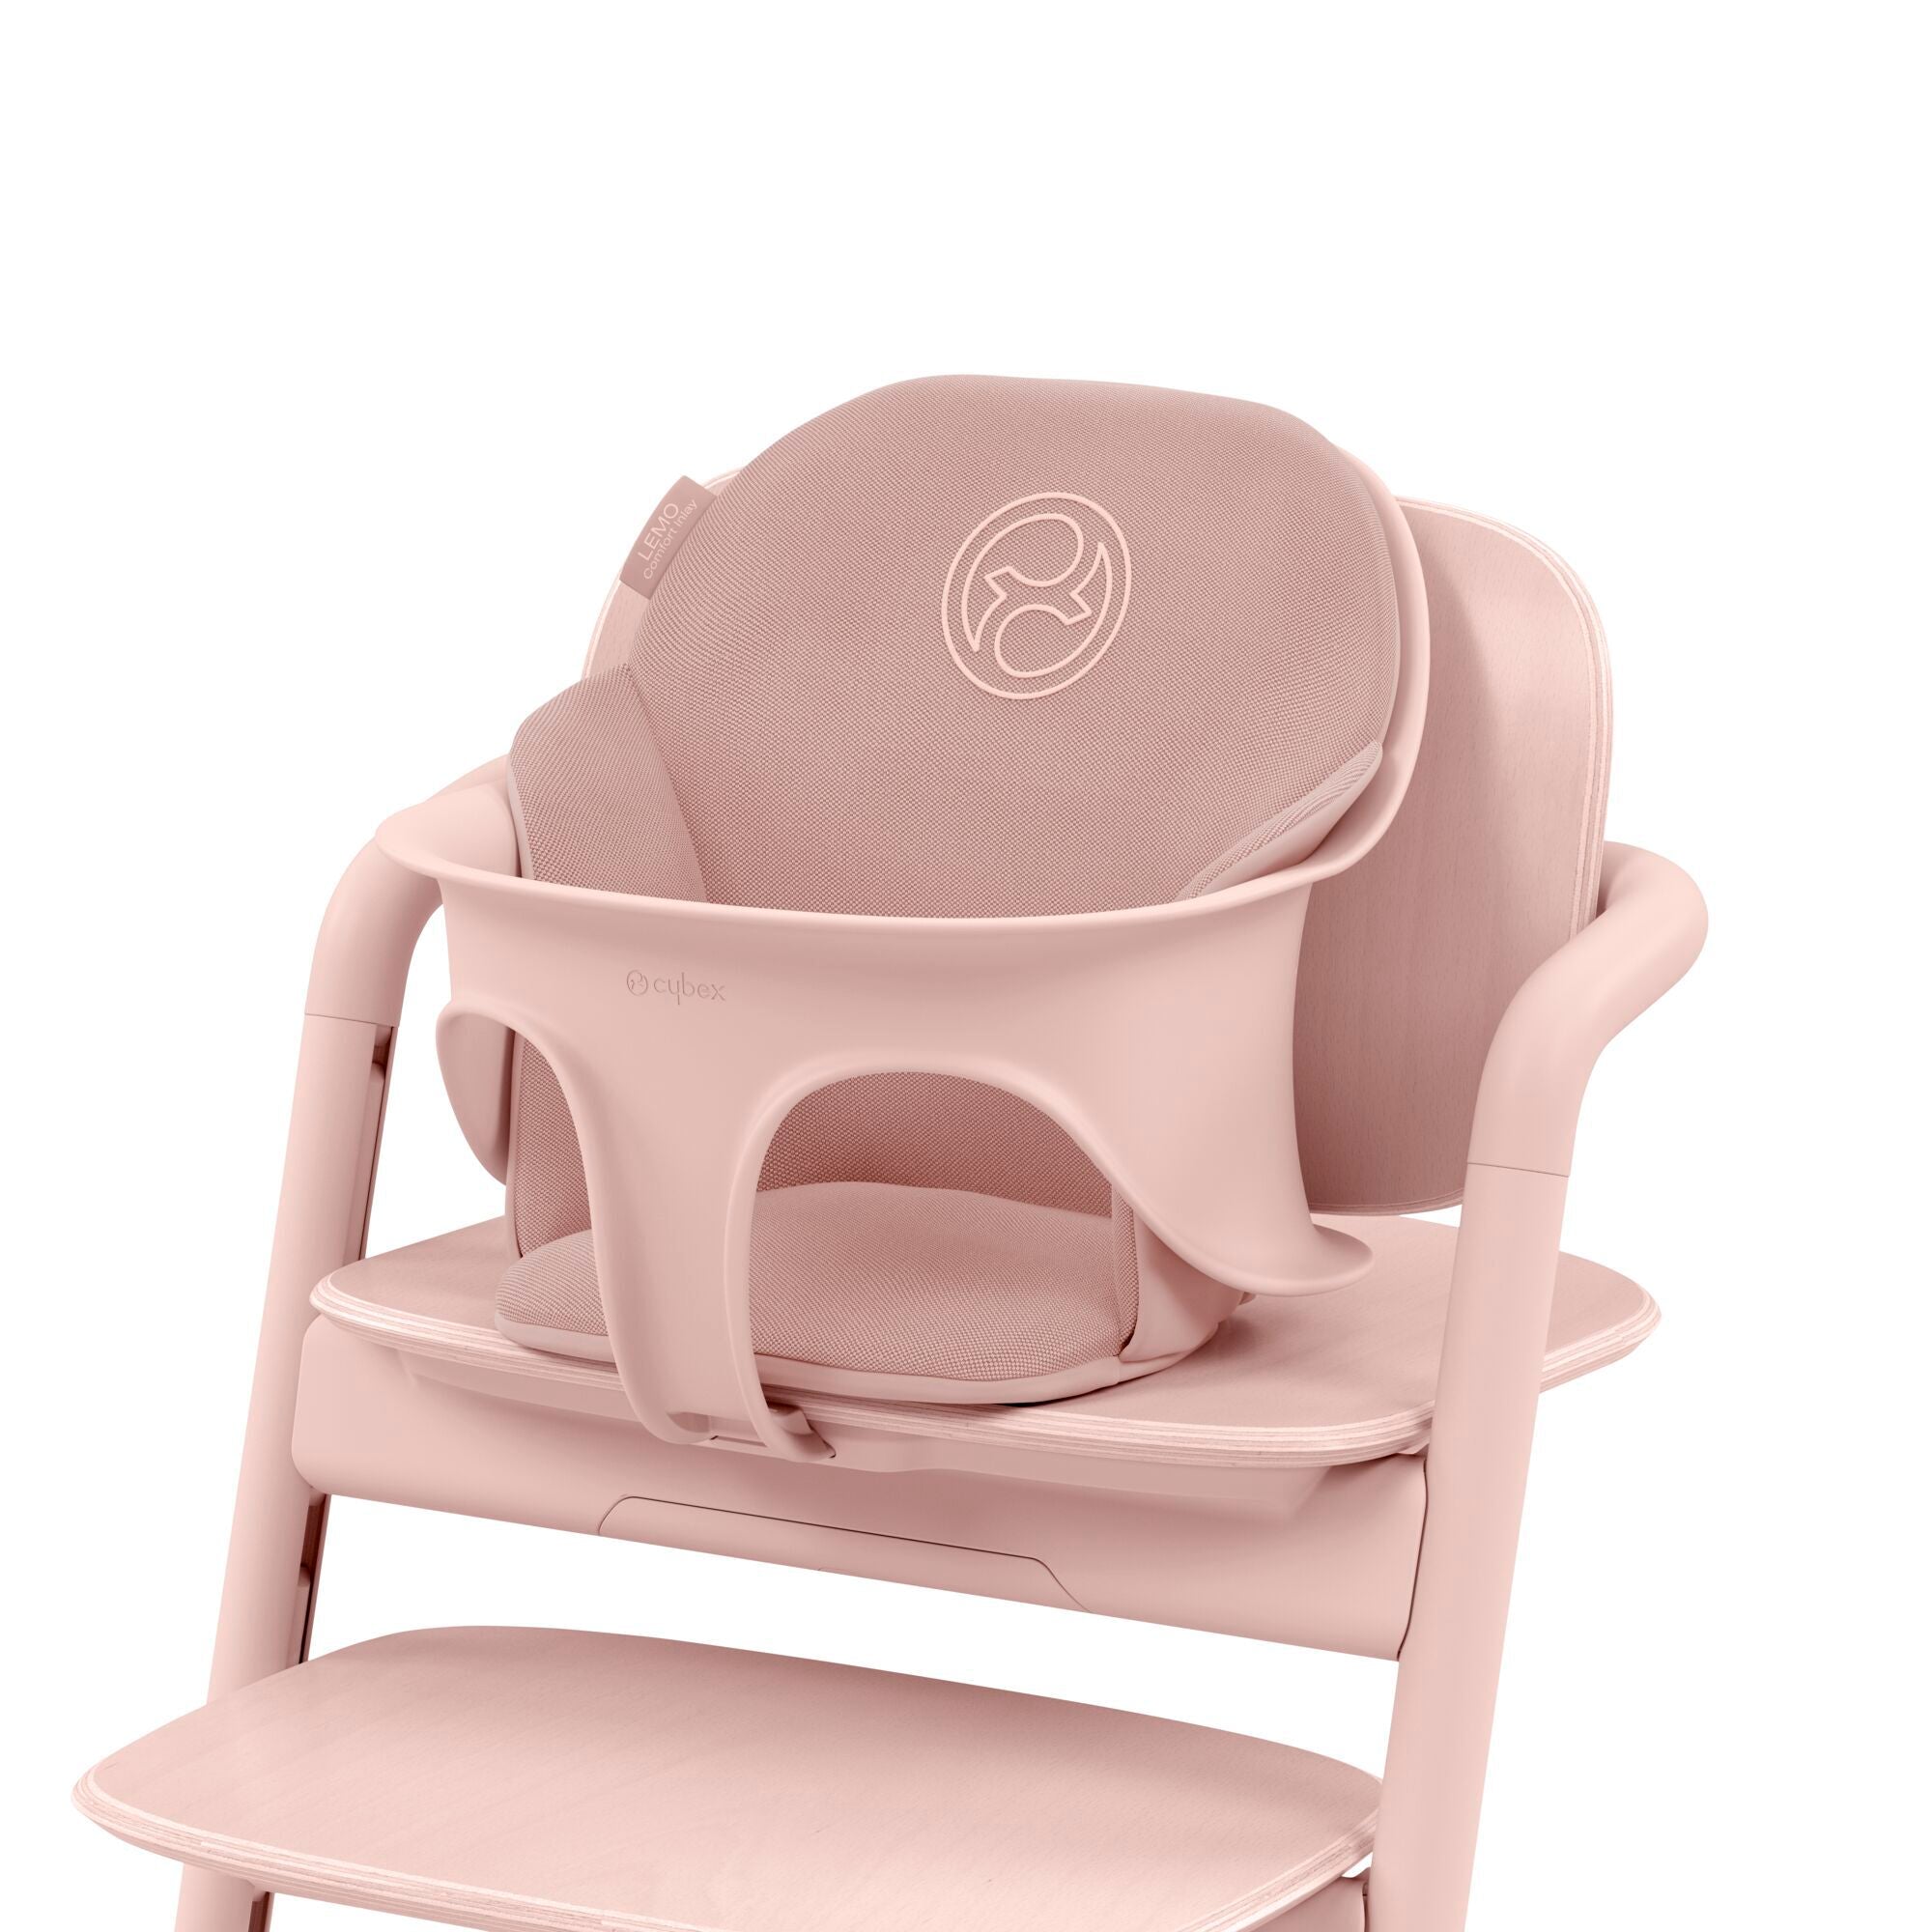 Cybex Comfort Inlay for Lemo 2 High Chair - ANB Baby -4063846225187Beige